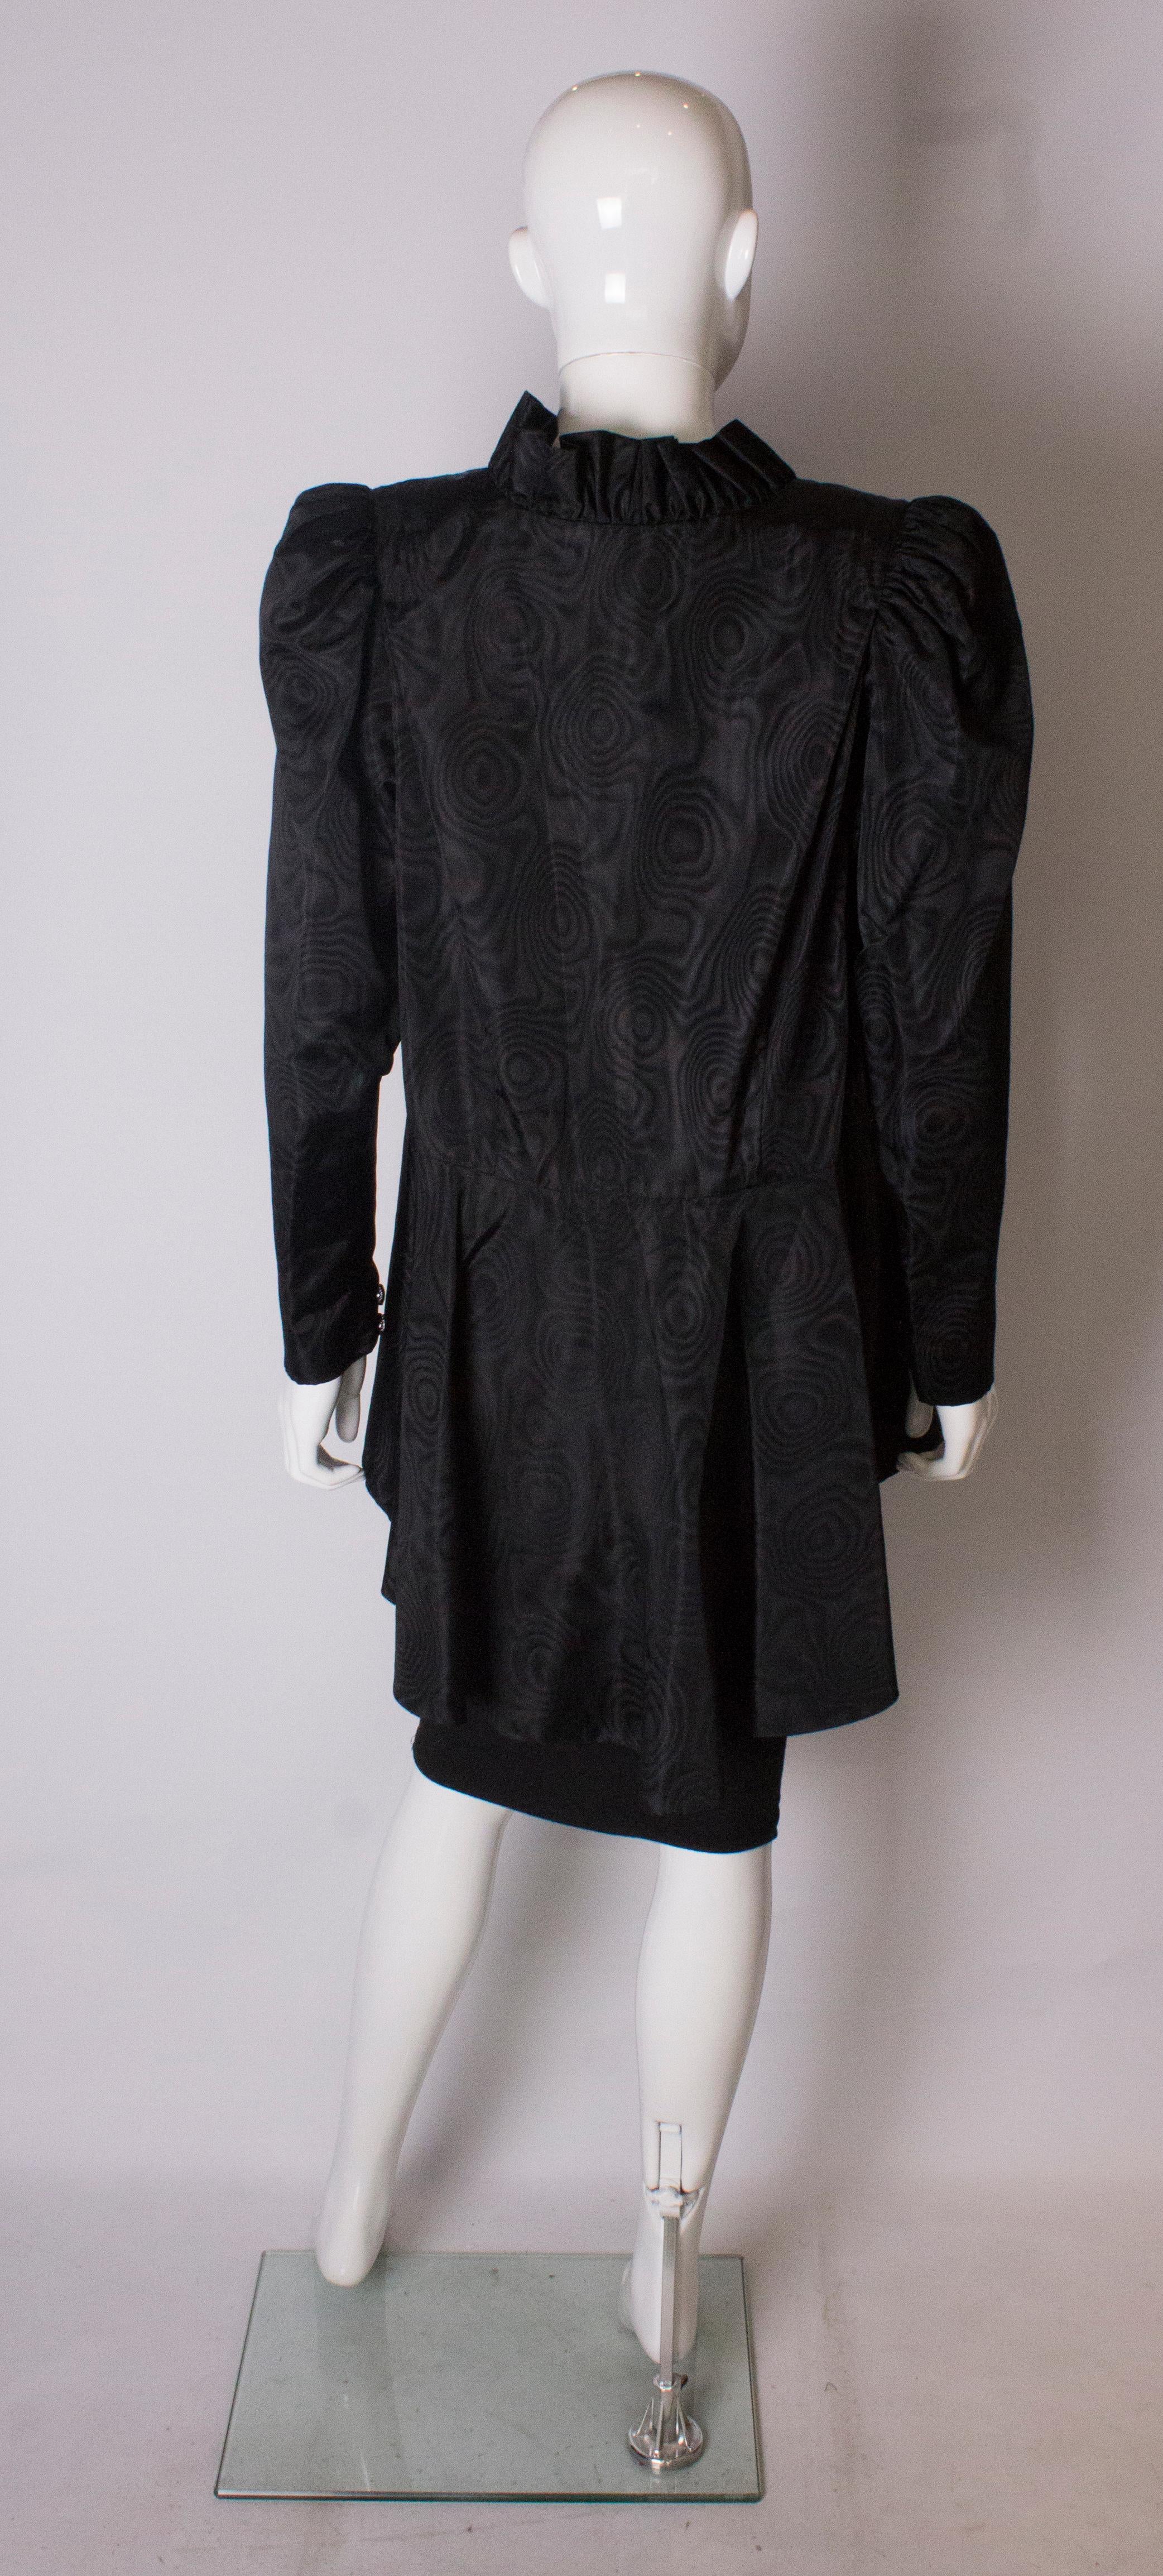 Black Moire Silk Vintage Jacket with Frill Edged Collar and Peplum For Sale 2